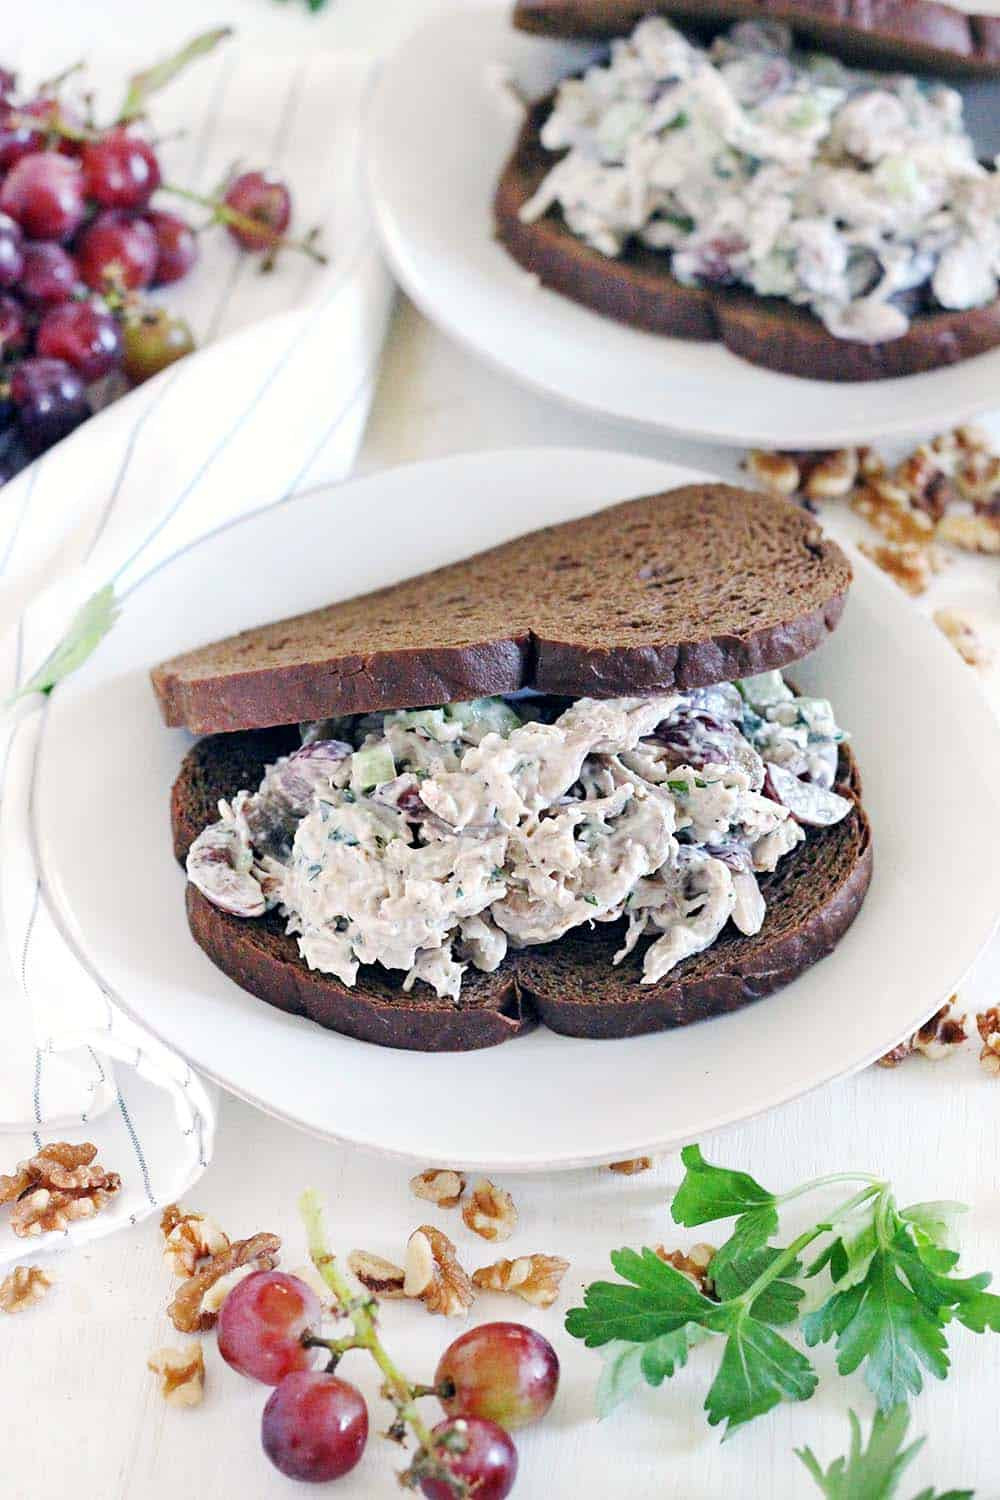 Easy Chicken Salad Recipe With Grapes
 Awesome Chicken Salad with grapes and walnuts